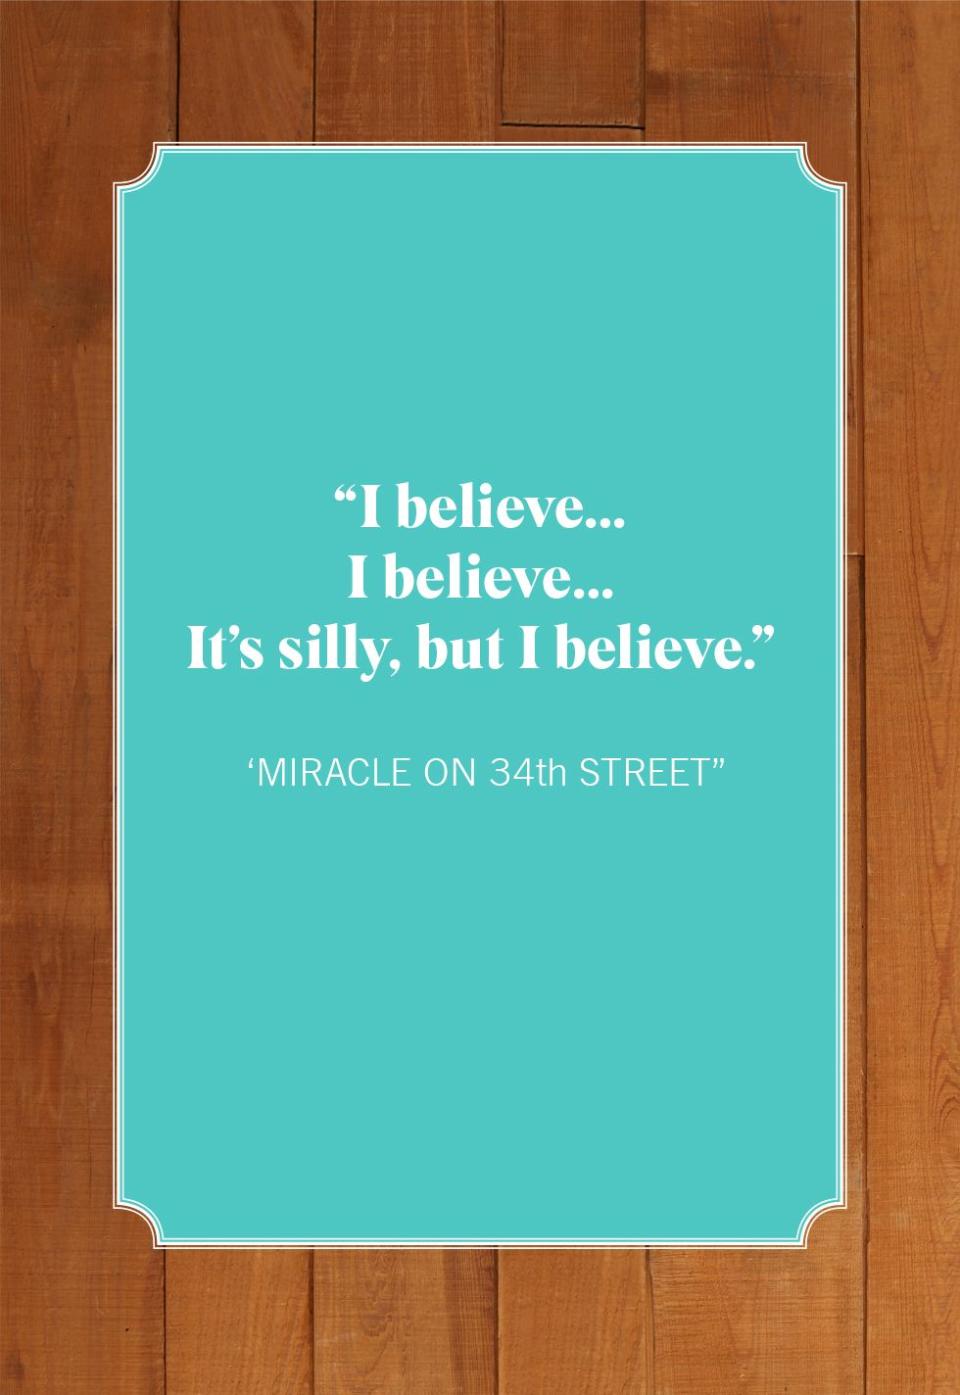 'Miracle on 34th Street'